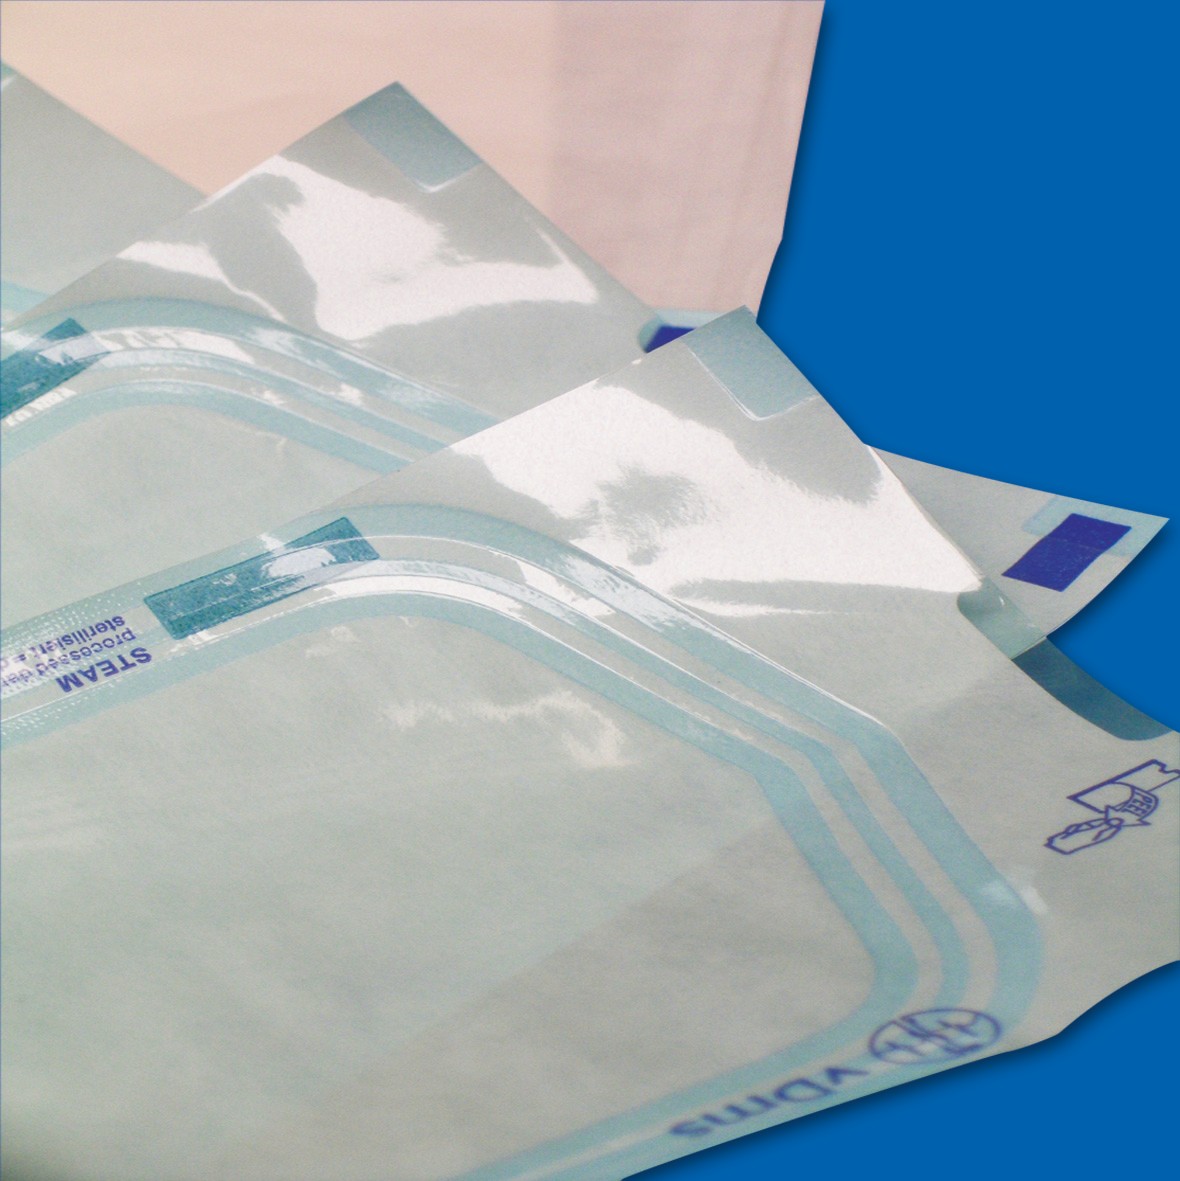 Easy-Peel Film to film  Pouch made of transparent film and available for gamma sterilization